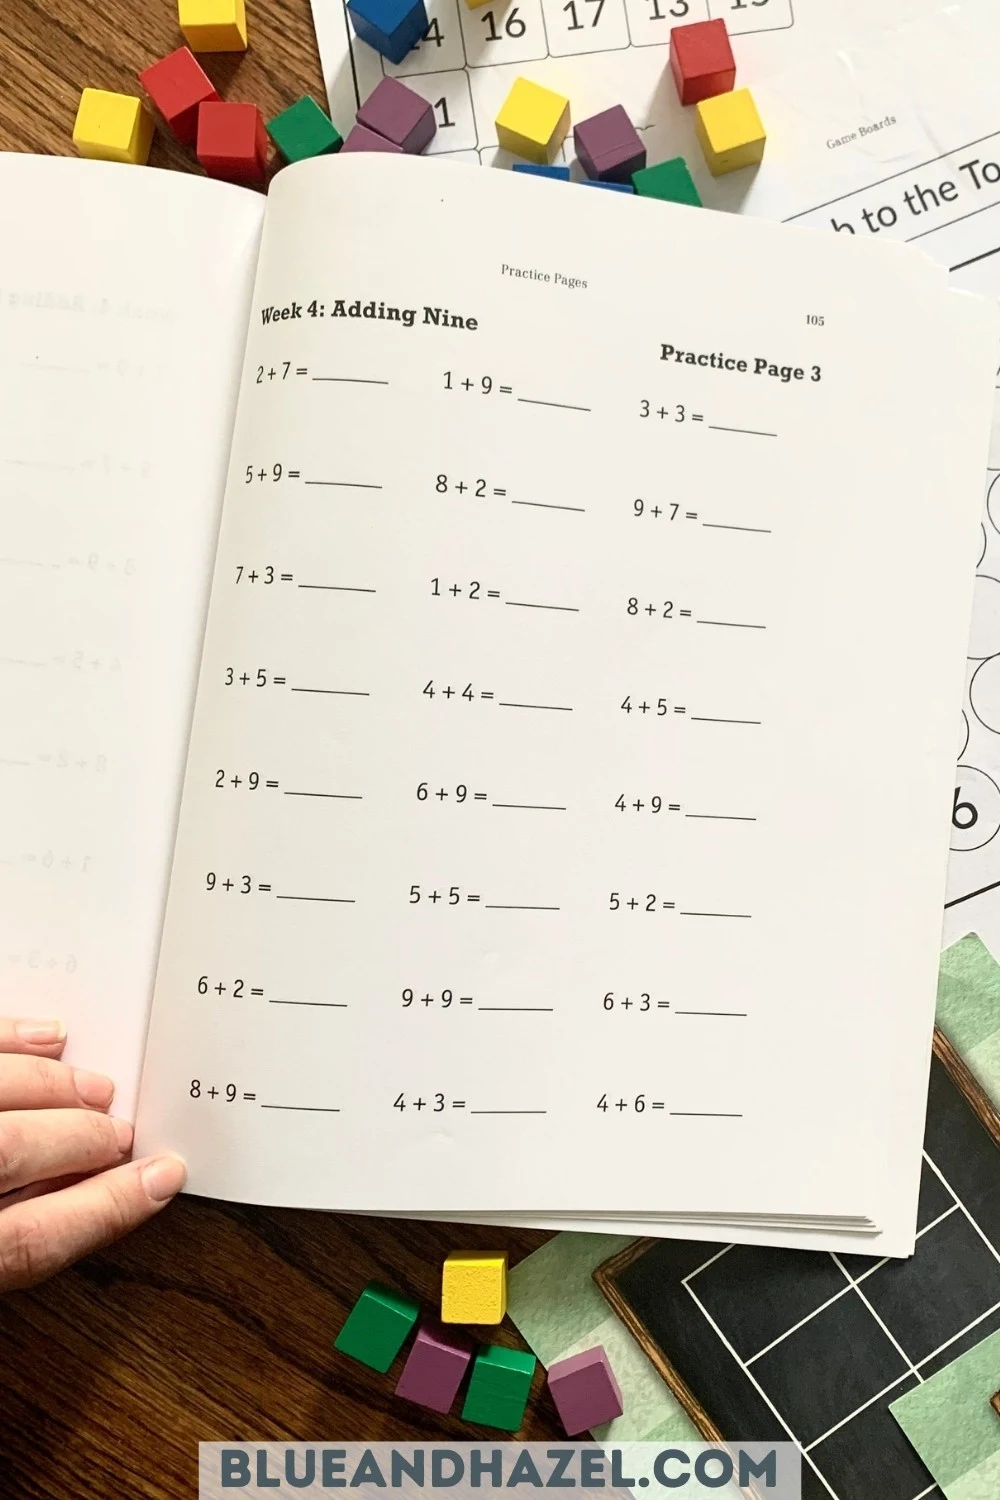 An addition math worksheet practicing +9 as well as some review of numbers adding up to 10. 